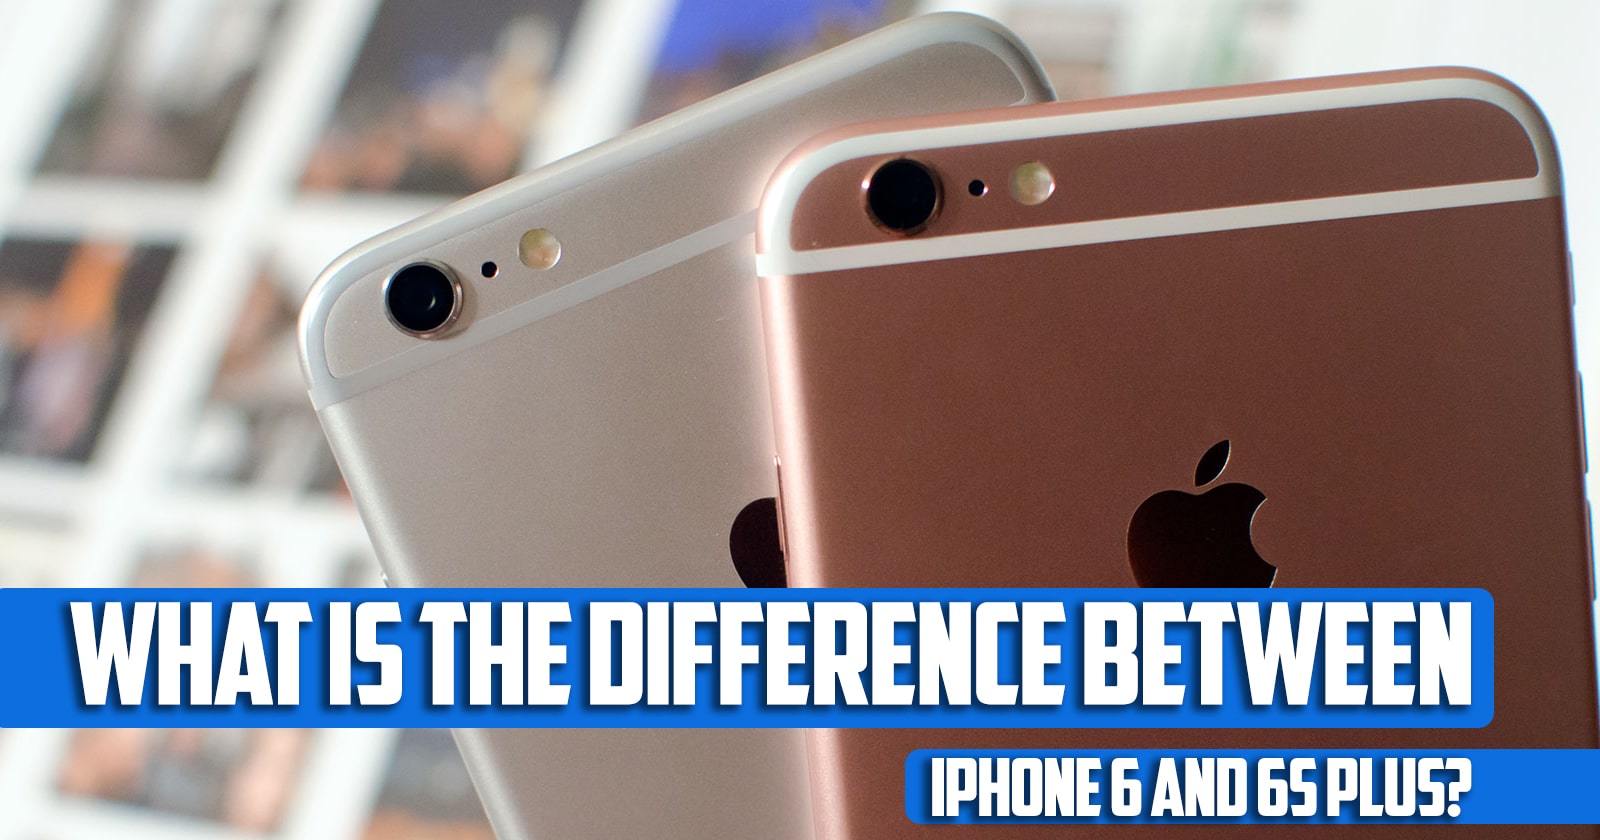 What is the difference between iPhone 6 and 6s plus?